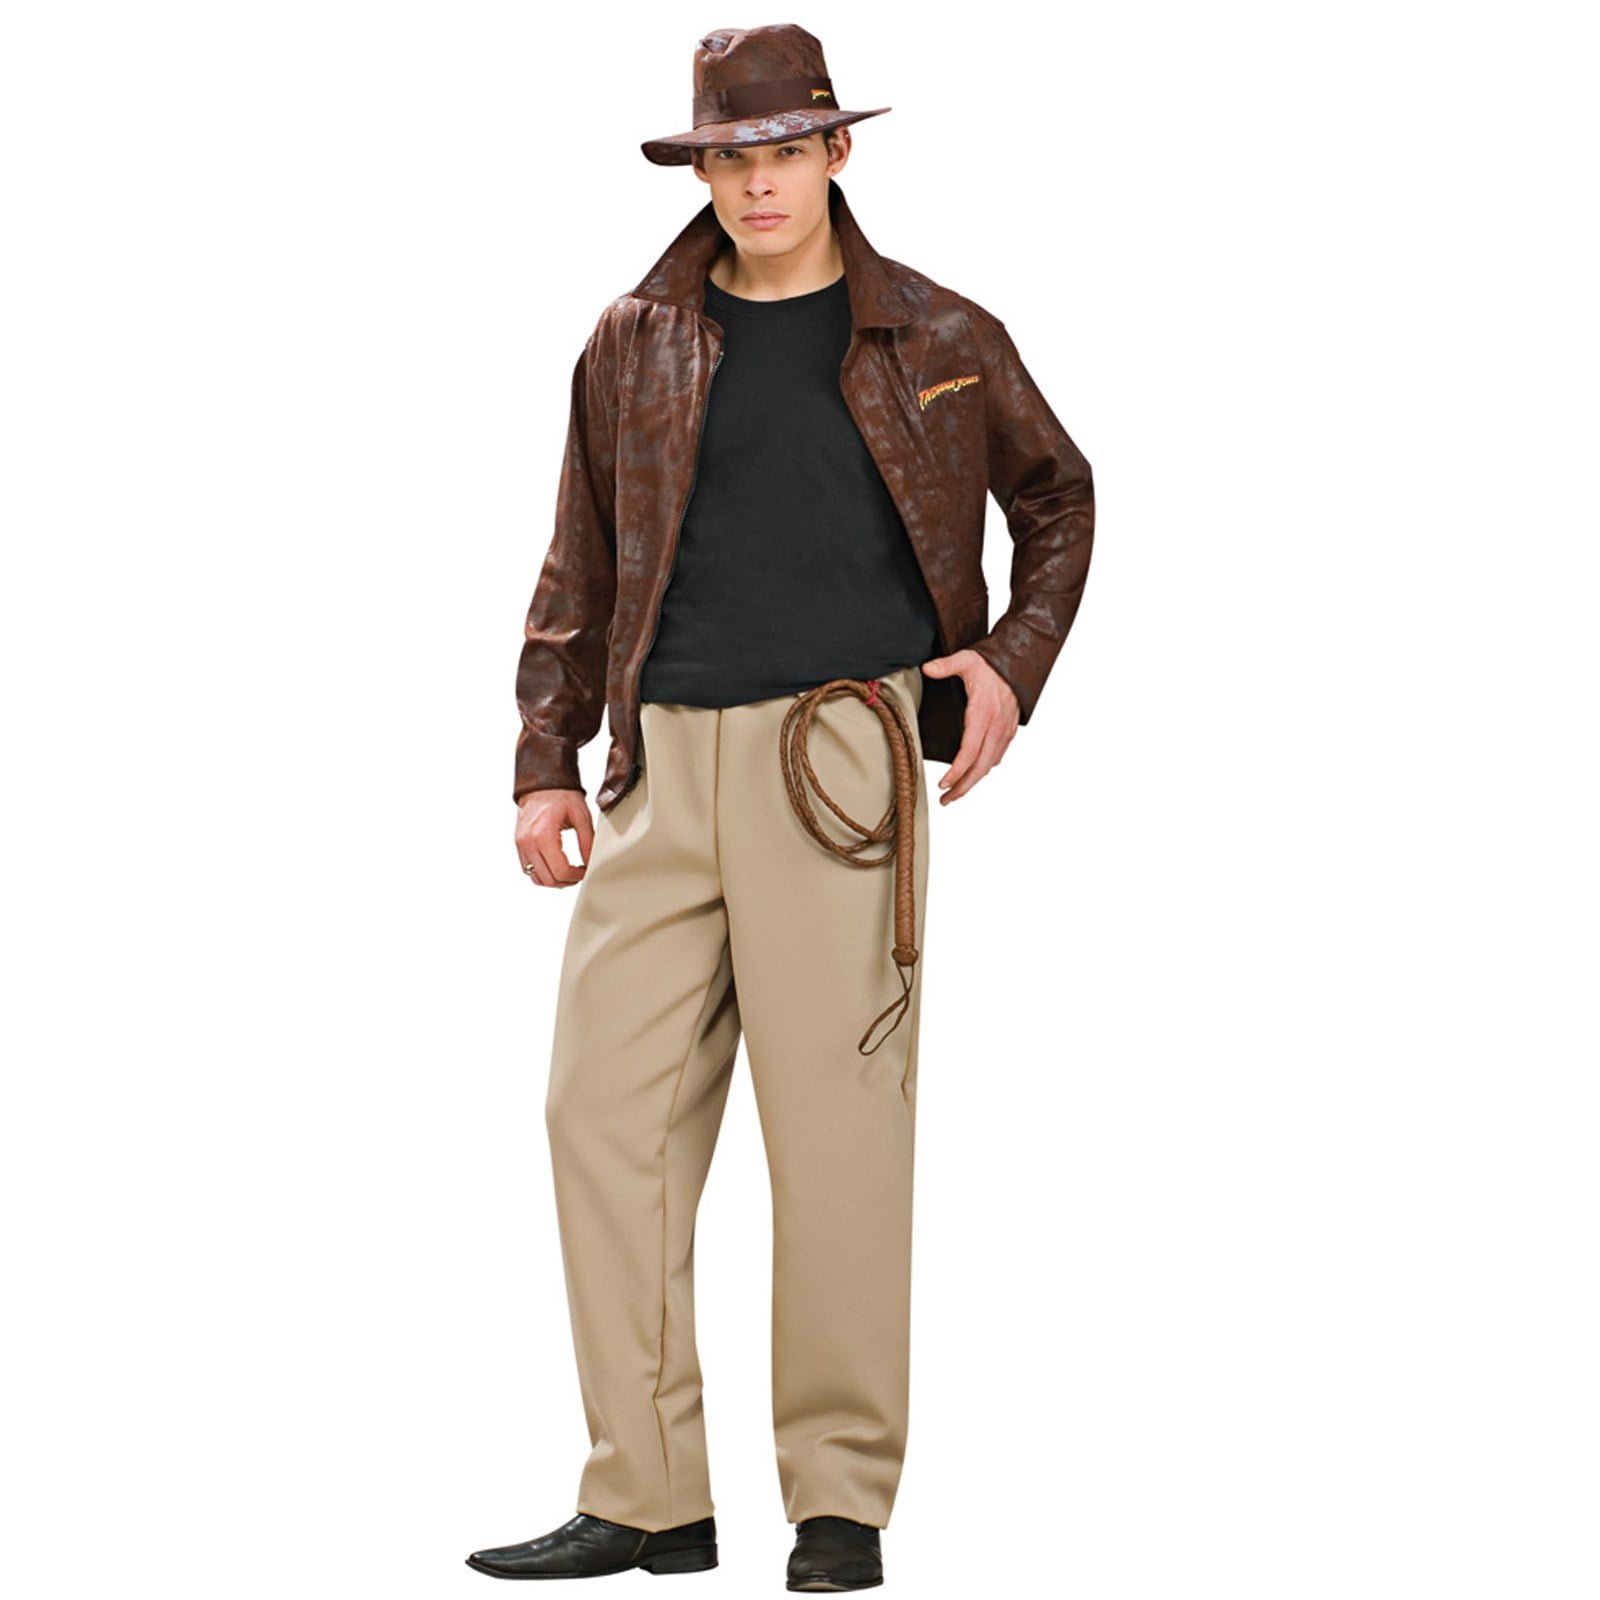 Indiana Jones 6' Leather Whip Brown 6 Foot Toy Halloween Costume Accessory 